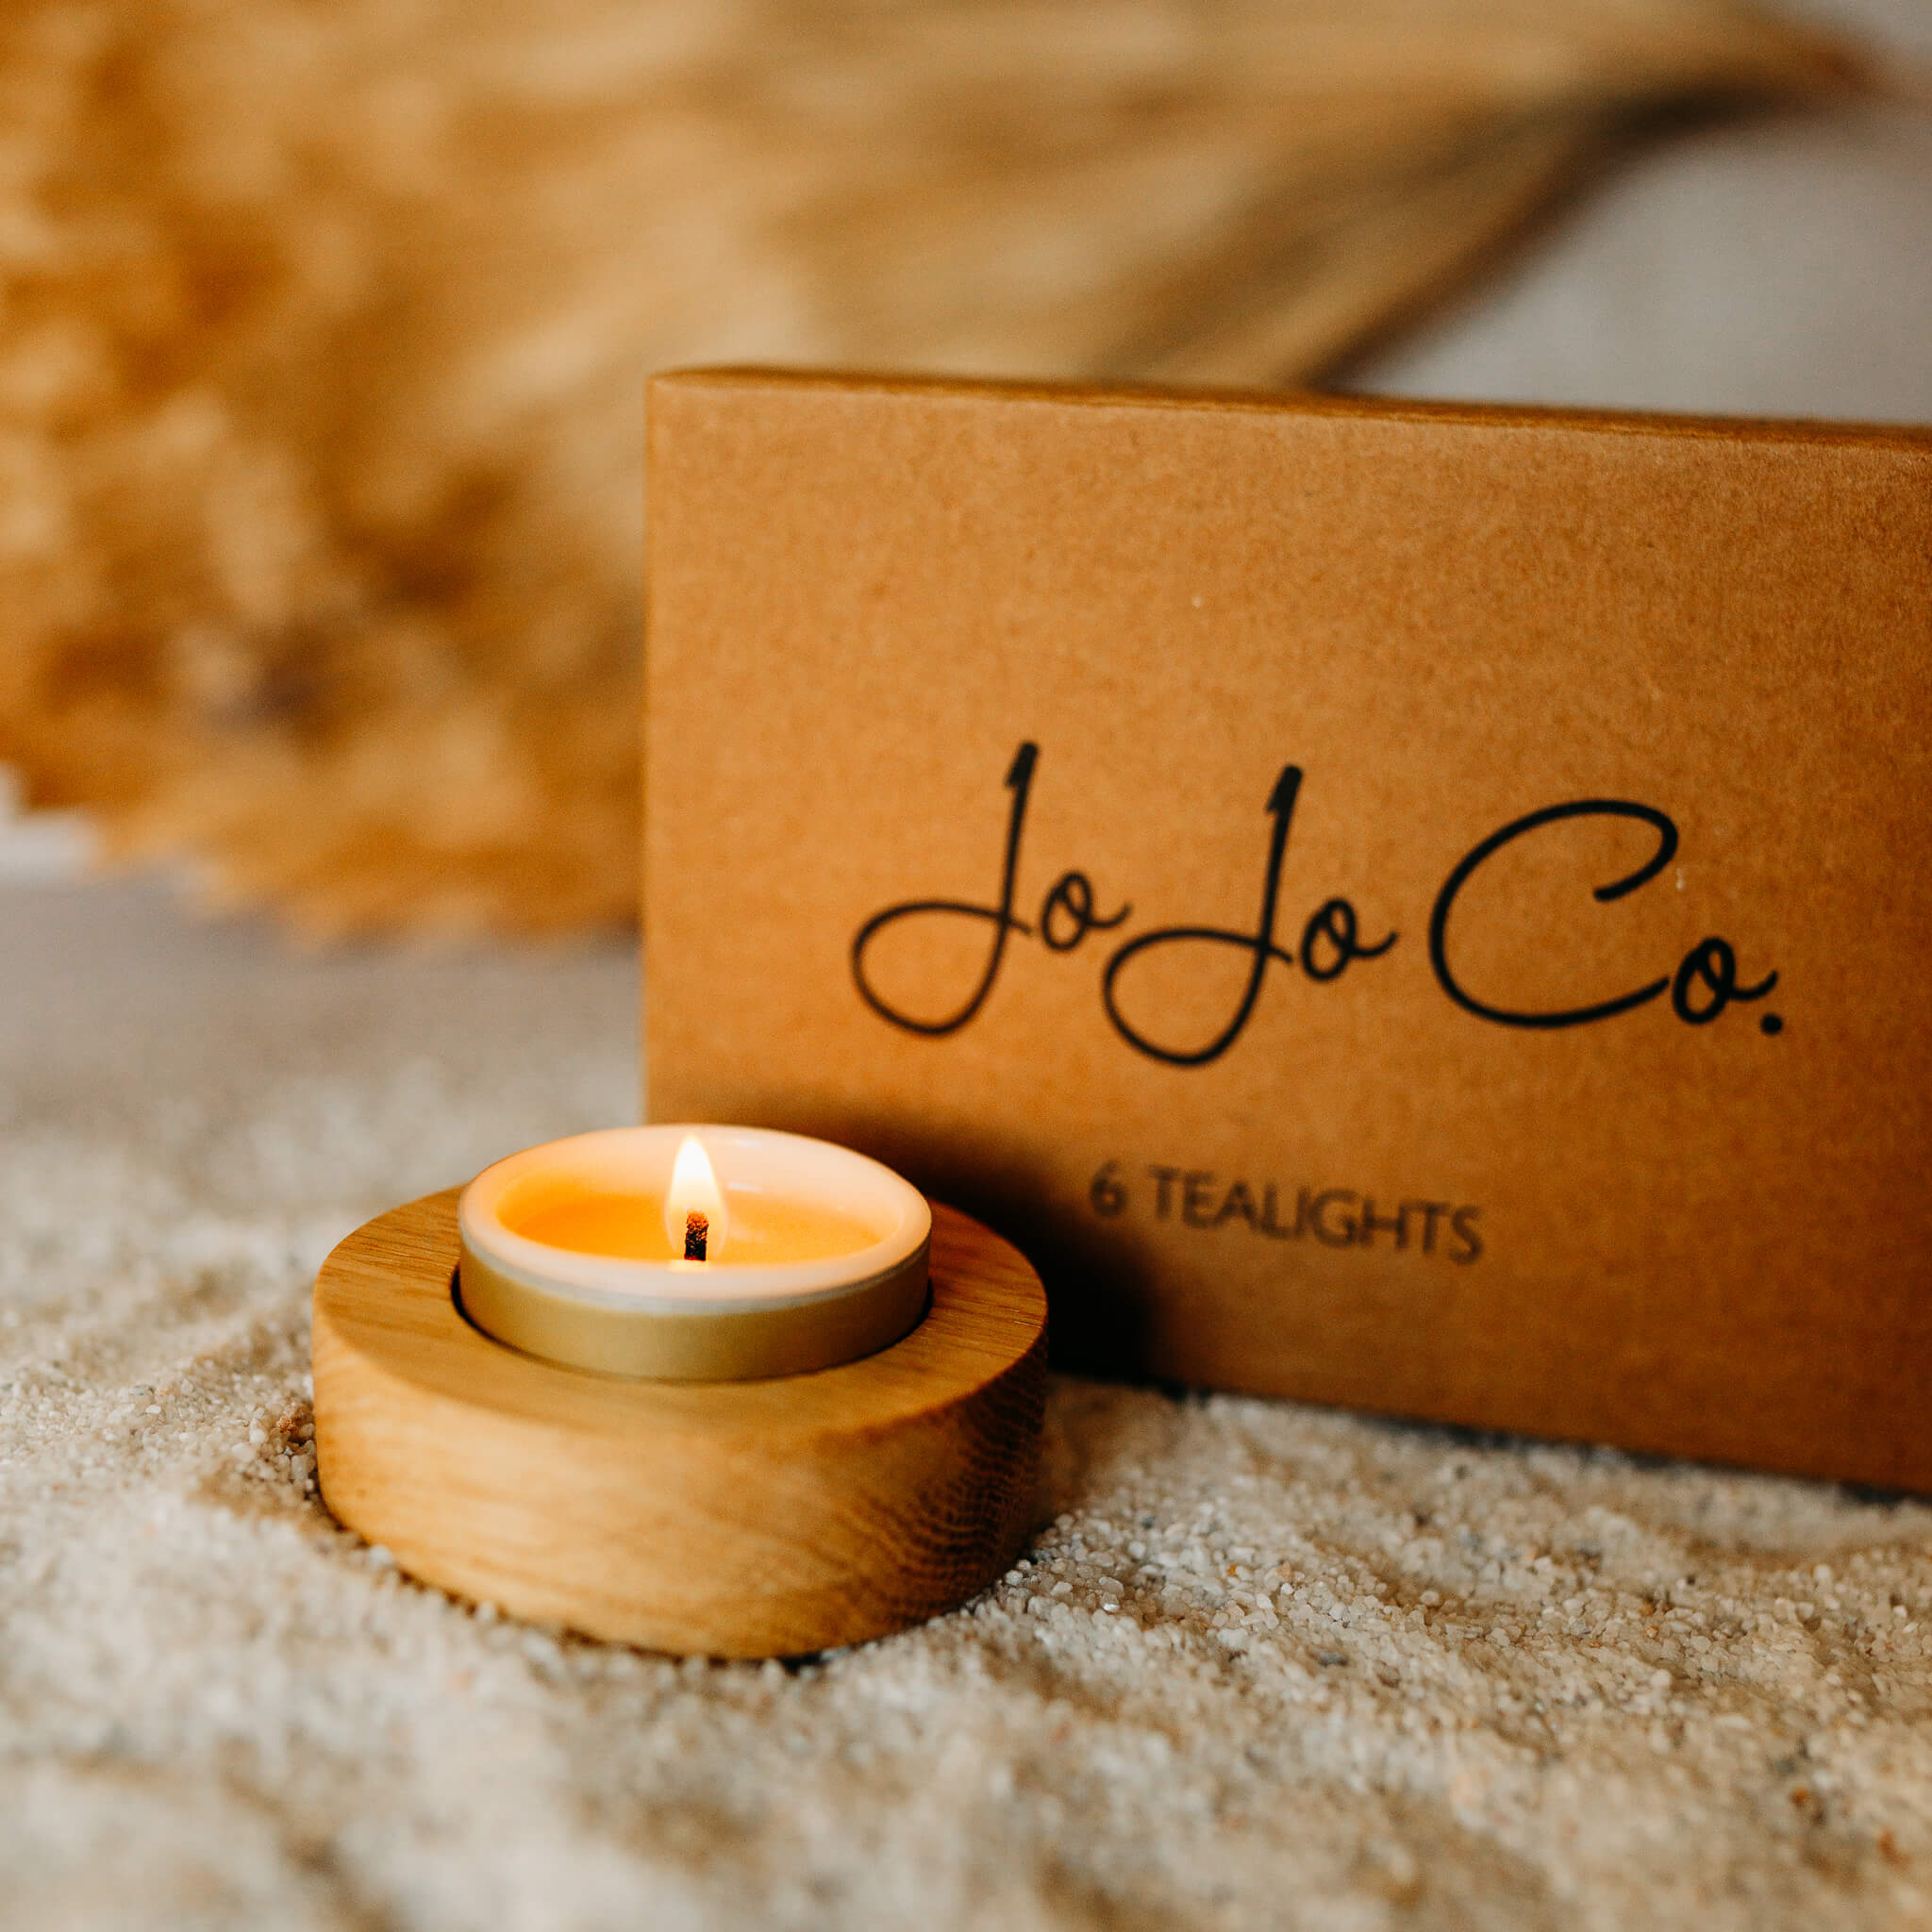 A lit tealight sits neatly in a round oak tealight base, on top of a scattering of sand. In the background is a cardboard box with the words JoJo Co. 6 tealights printed